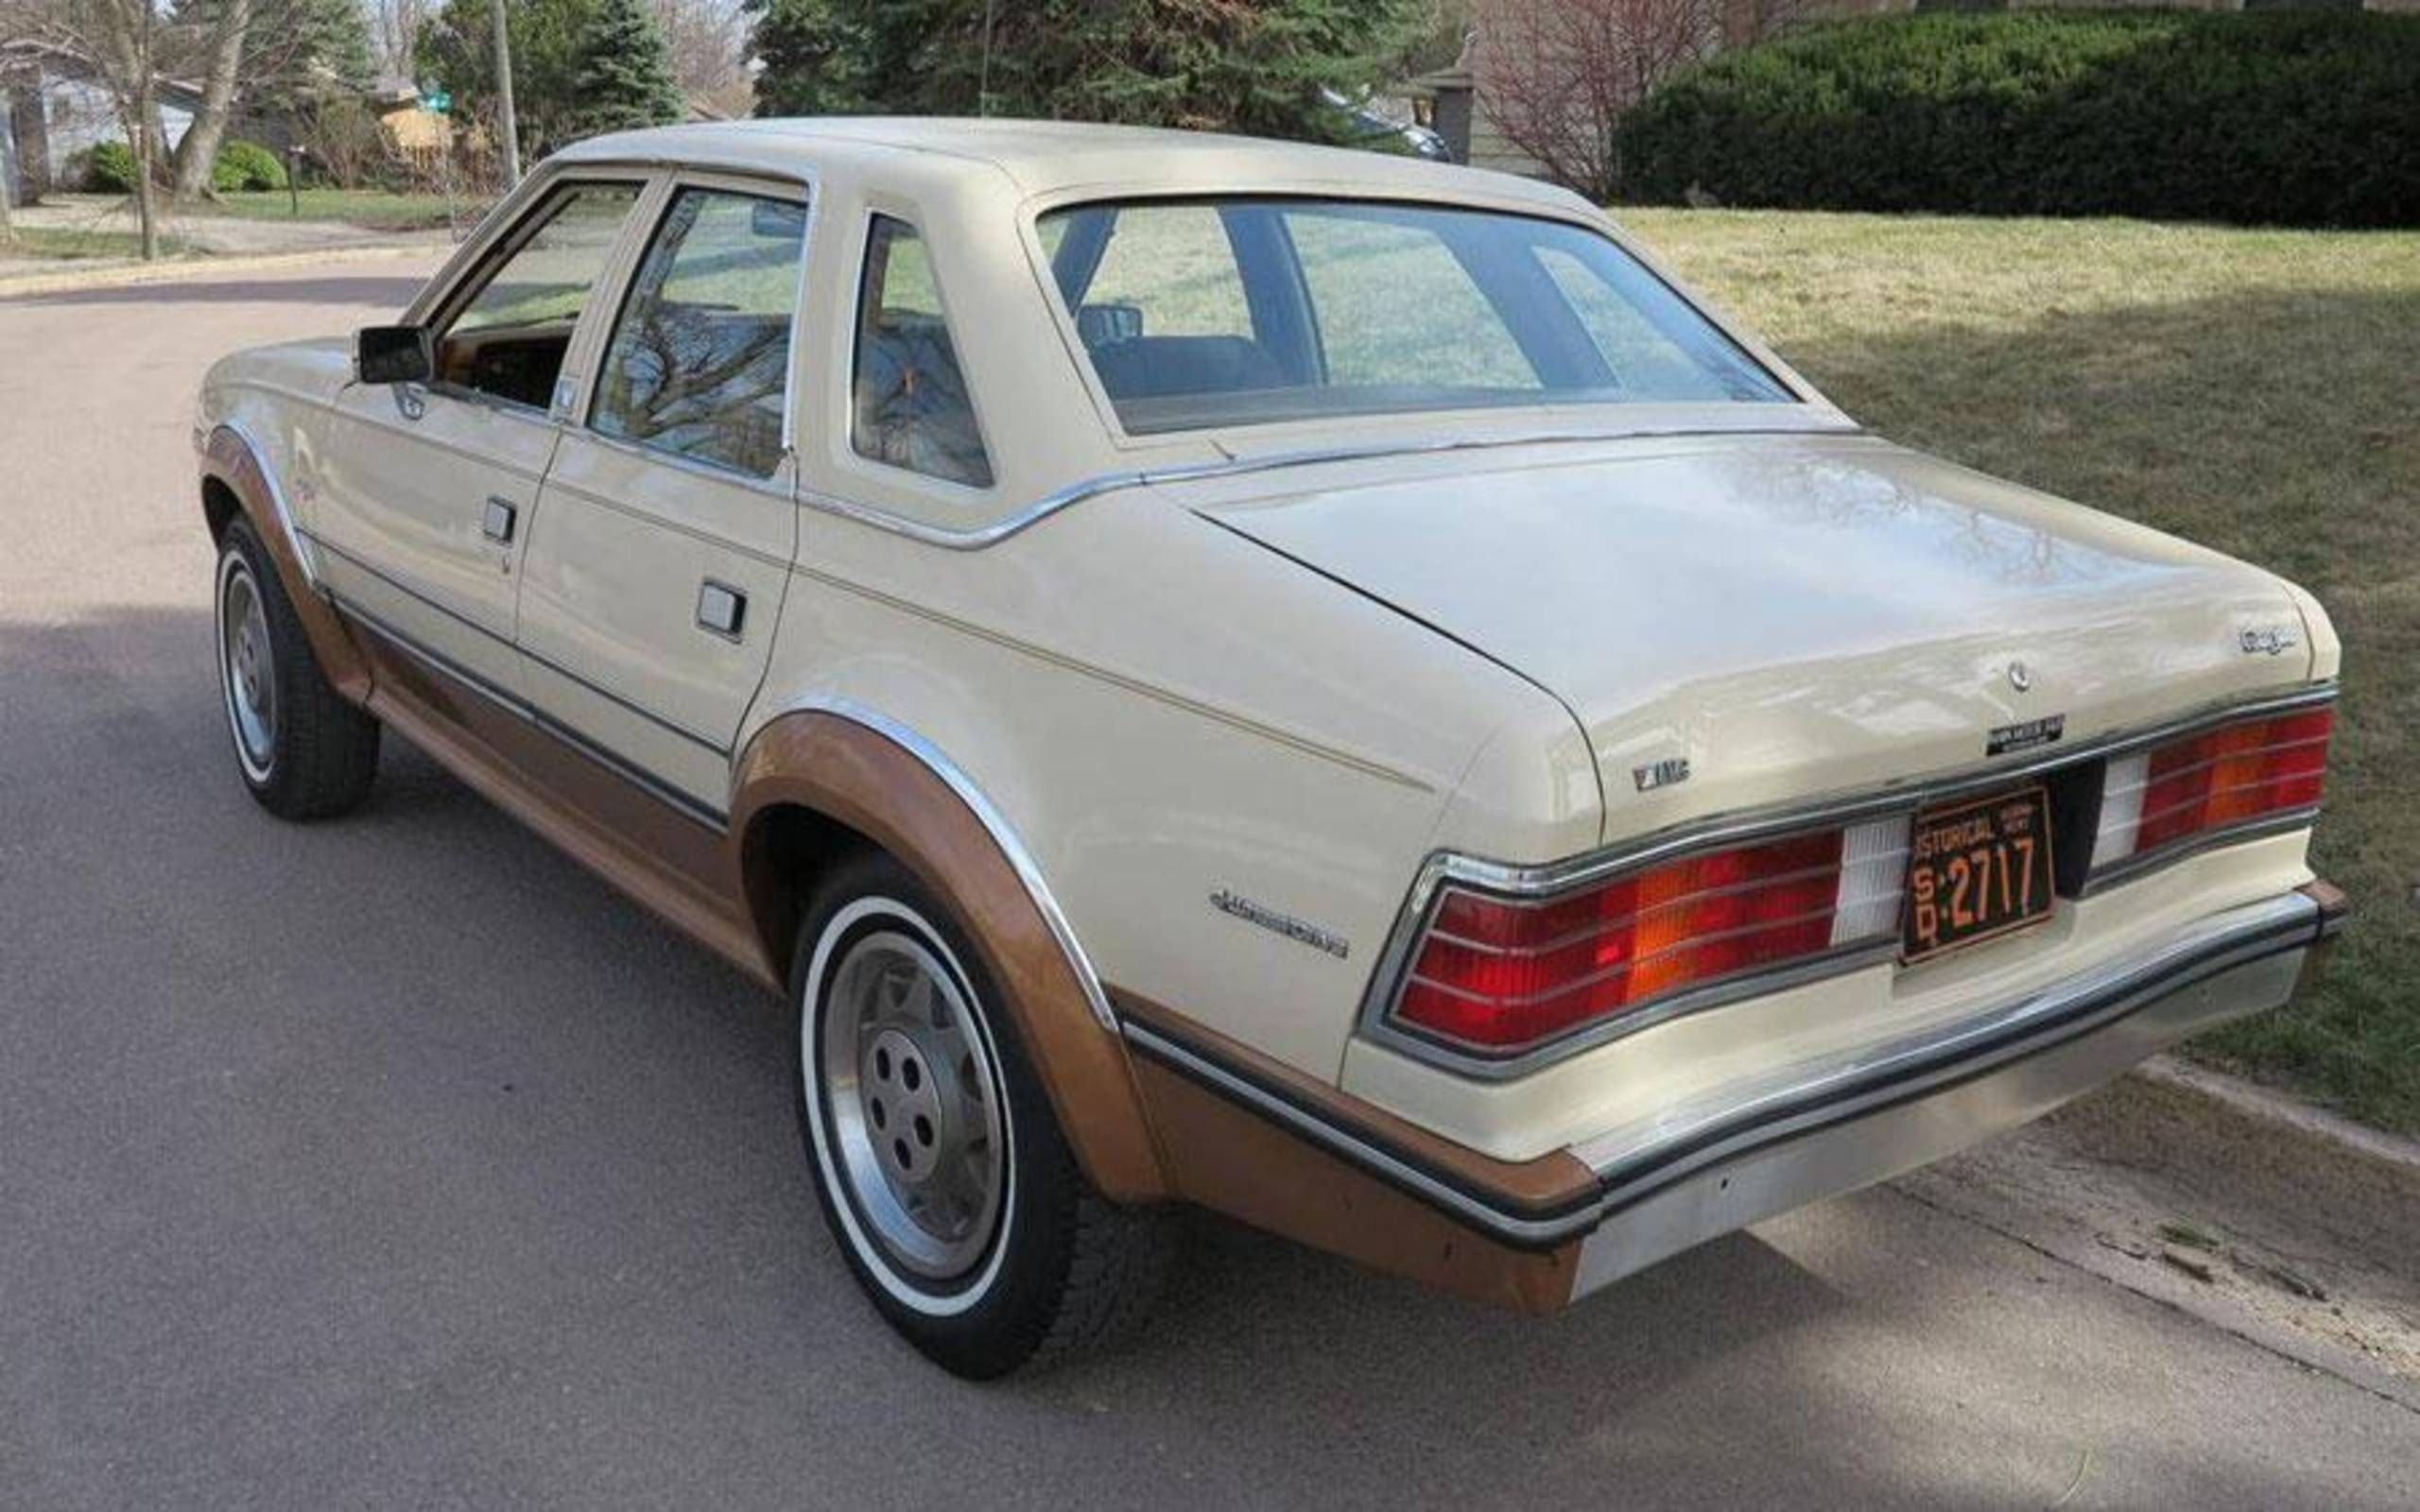 For Sale The Cleanest AMC Eagle Sedan In Existence.